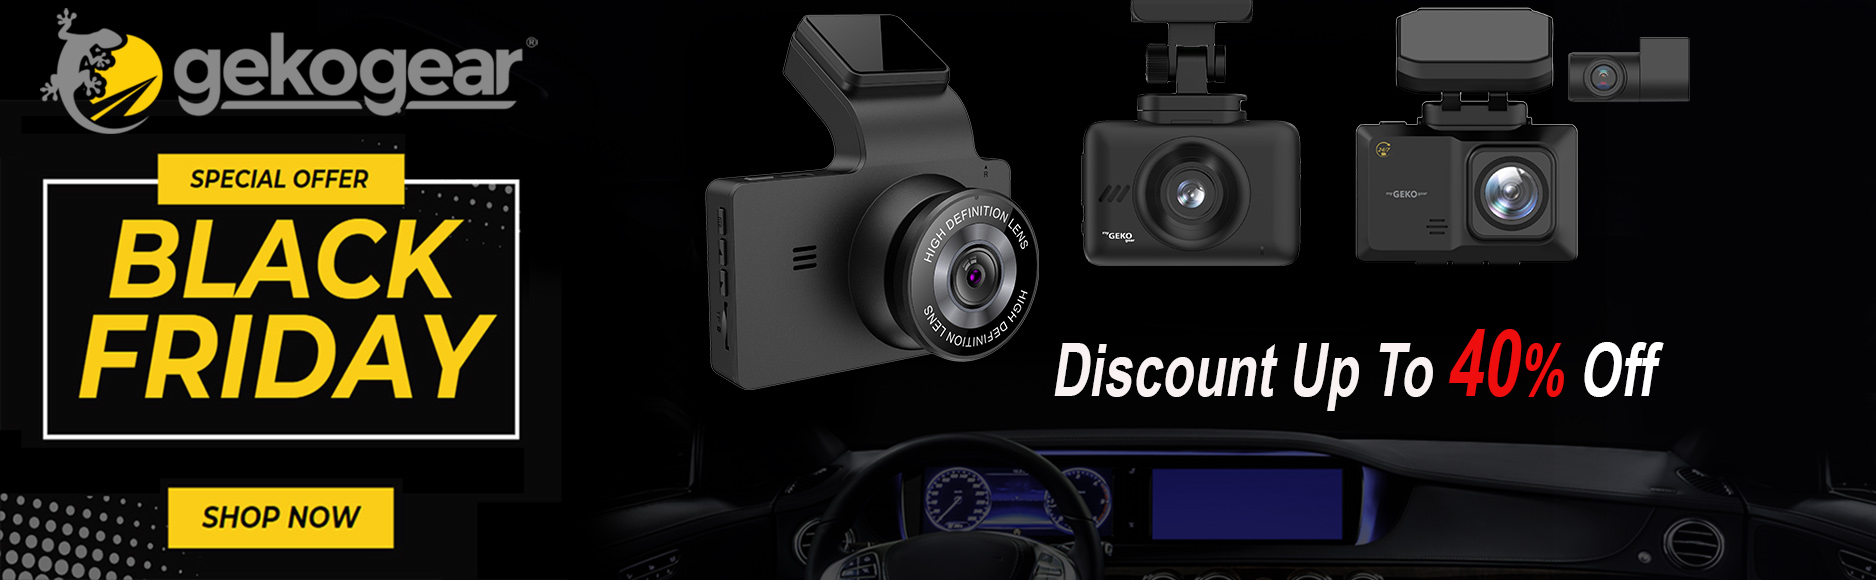 Start your Black Friday Shopping Early & Save Up To 40% Off Best Selling Dash Cams Offer Expires November 30th, 2023 (40% off dash cams are listed below with sales price. Other items on this page will be automatically applied coupon code “geko30” to reflect the 30% Off sales price at check out)